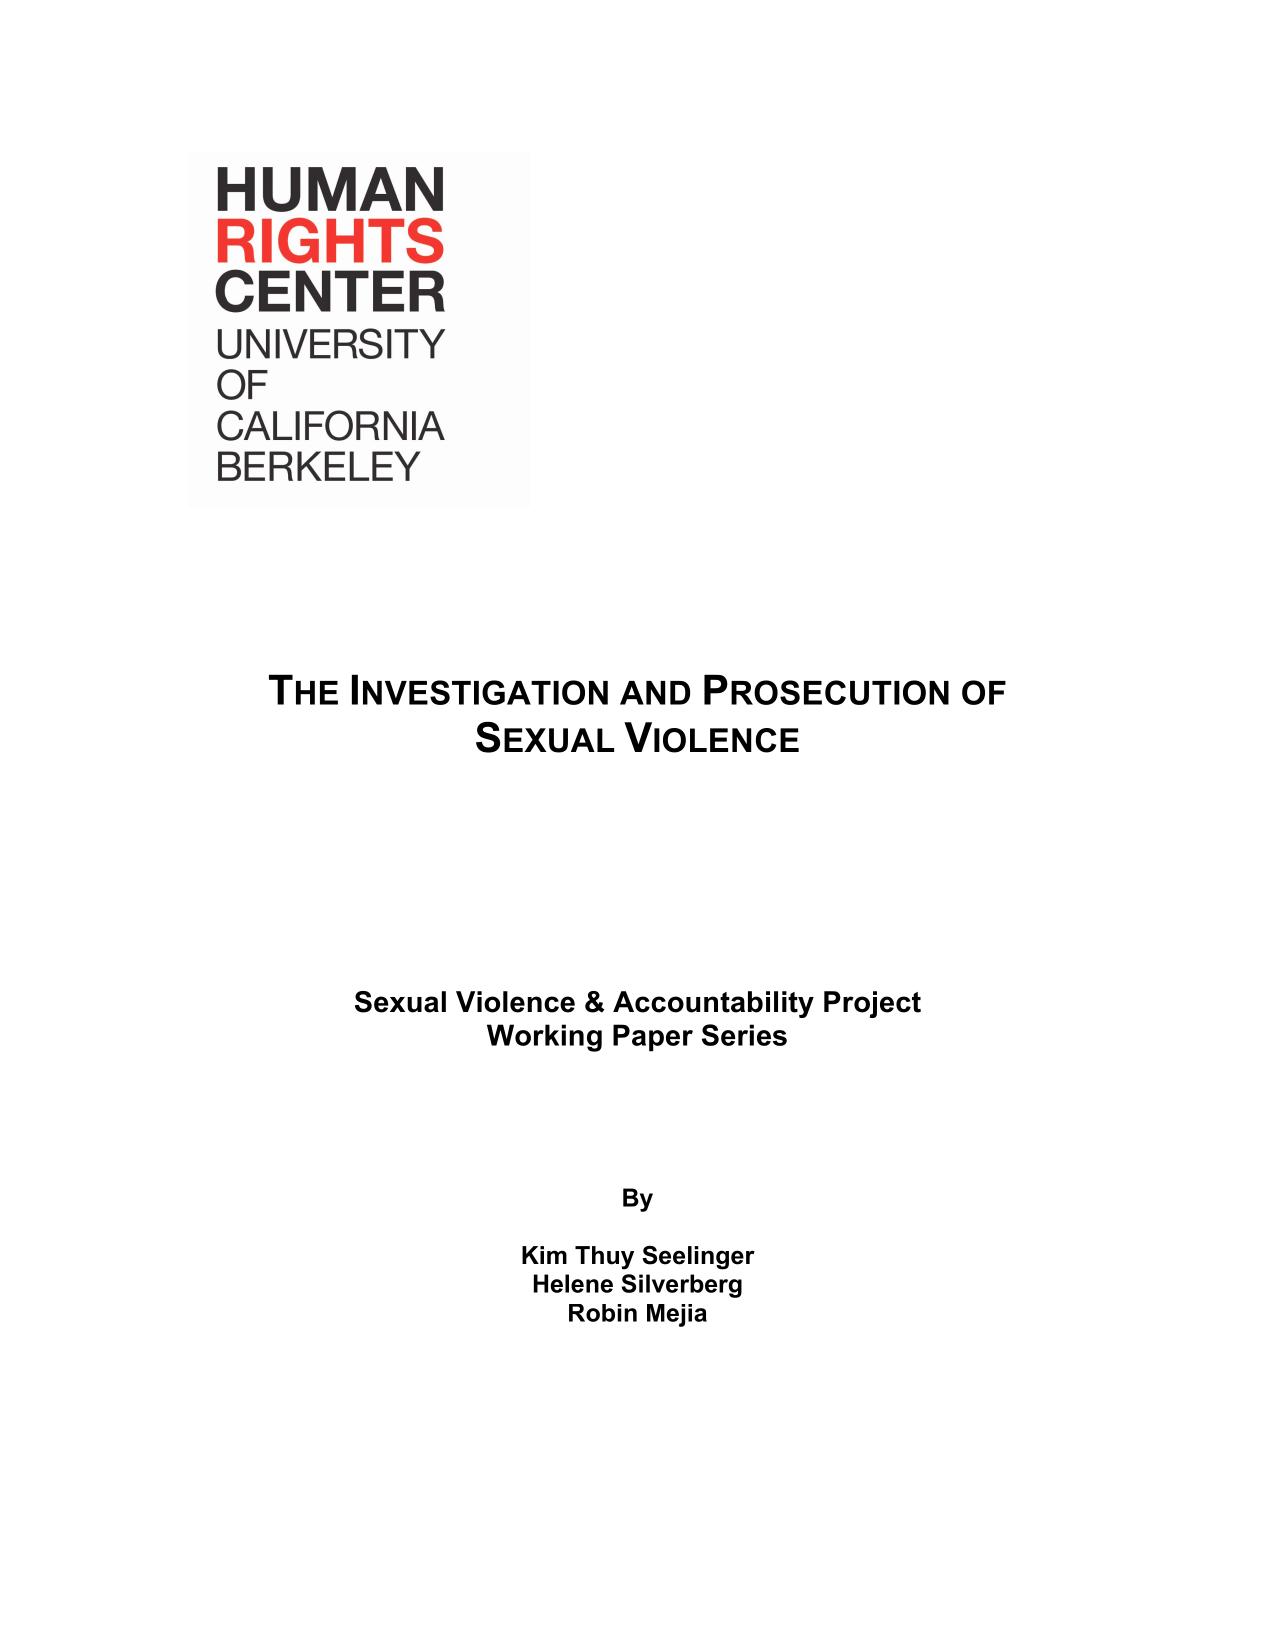 The Investigation and Prosecution of Sexual Violence